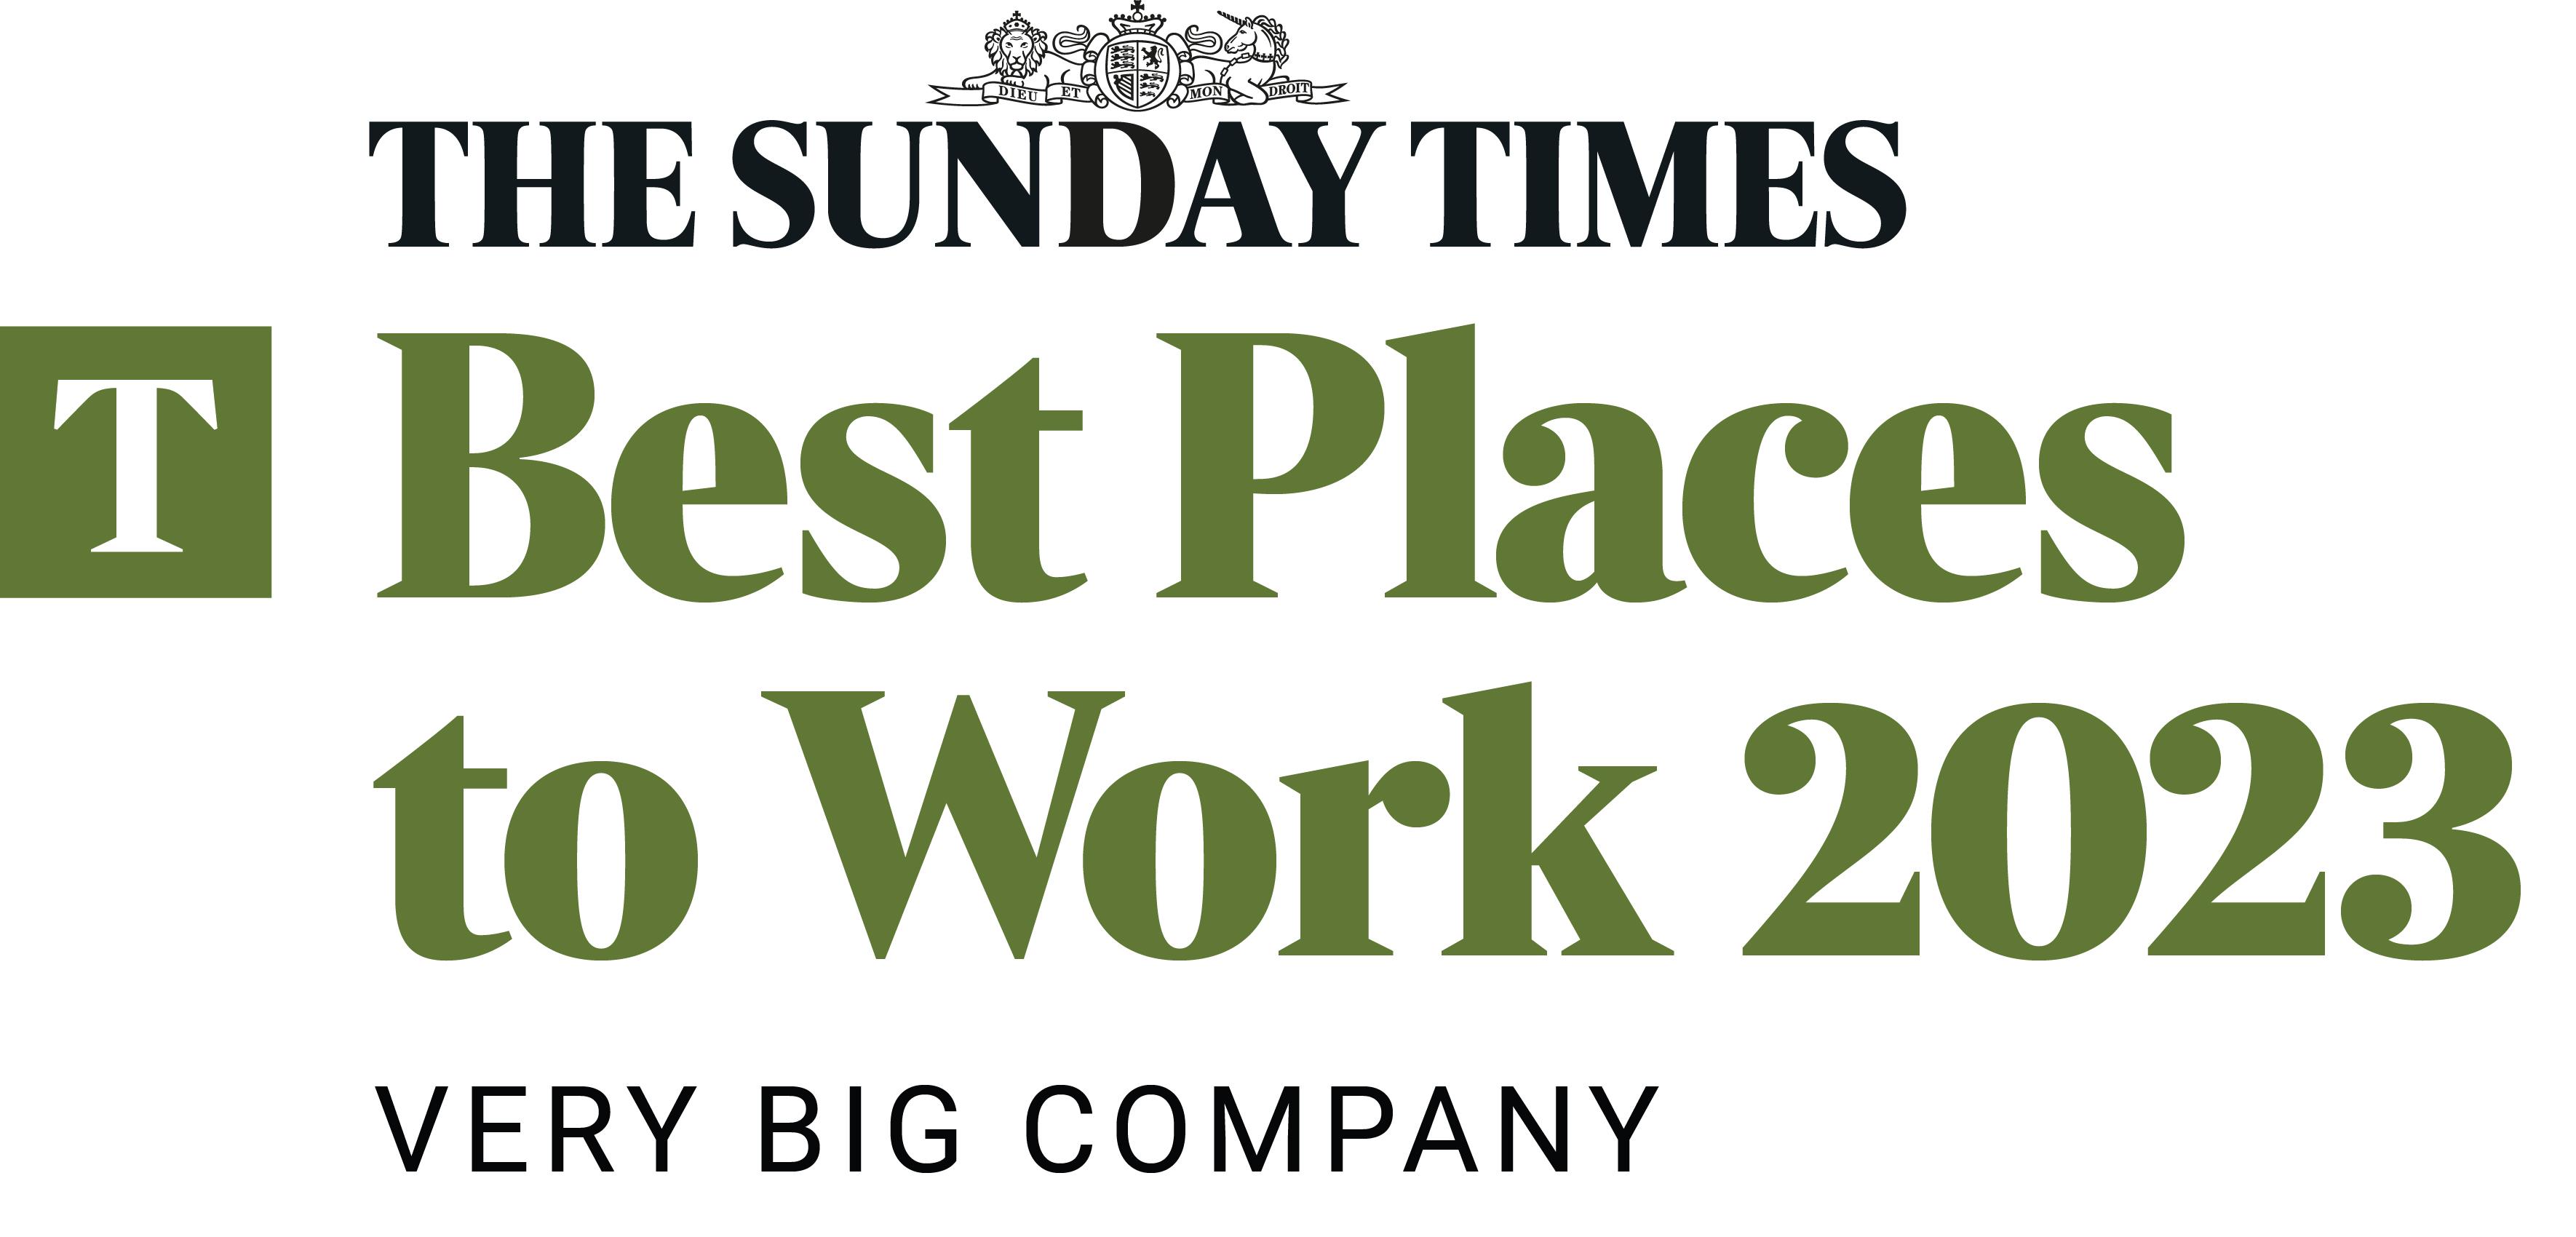 The Sunday Times’ Best Places to Work 2023 - Very Big Company.